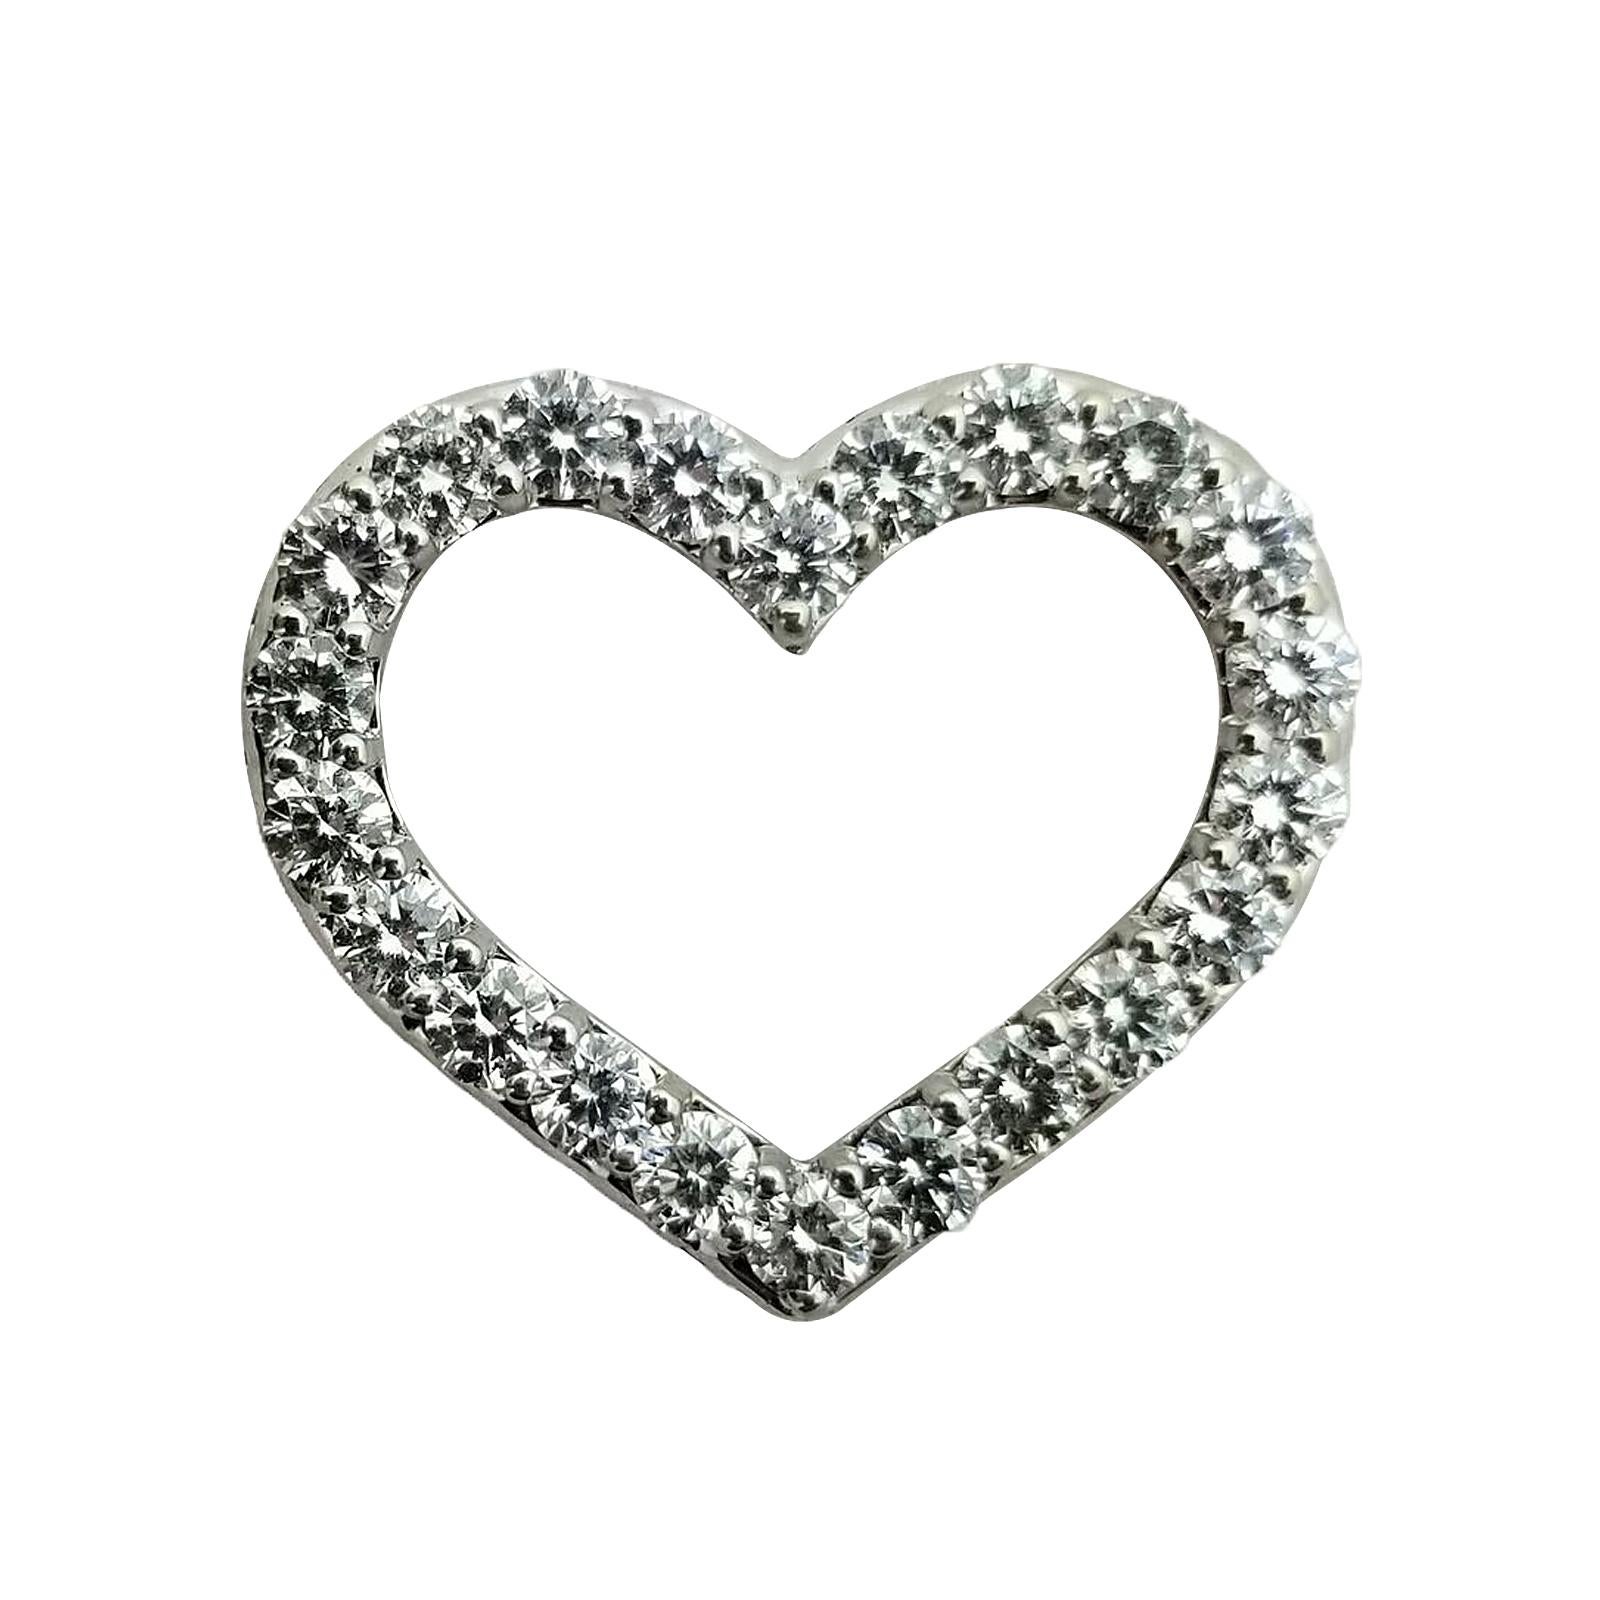 Open Hart Diamond Pendant Necklace 18K White Gold by Roberto Coin. This is a piece for every personality. This beautiful diamond open heart pendant by designer Roberto Coin features 22 round brilliant cut diamonds graded G/H color and VS2 clarity.